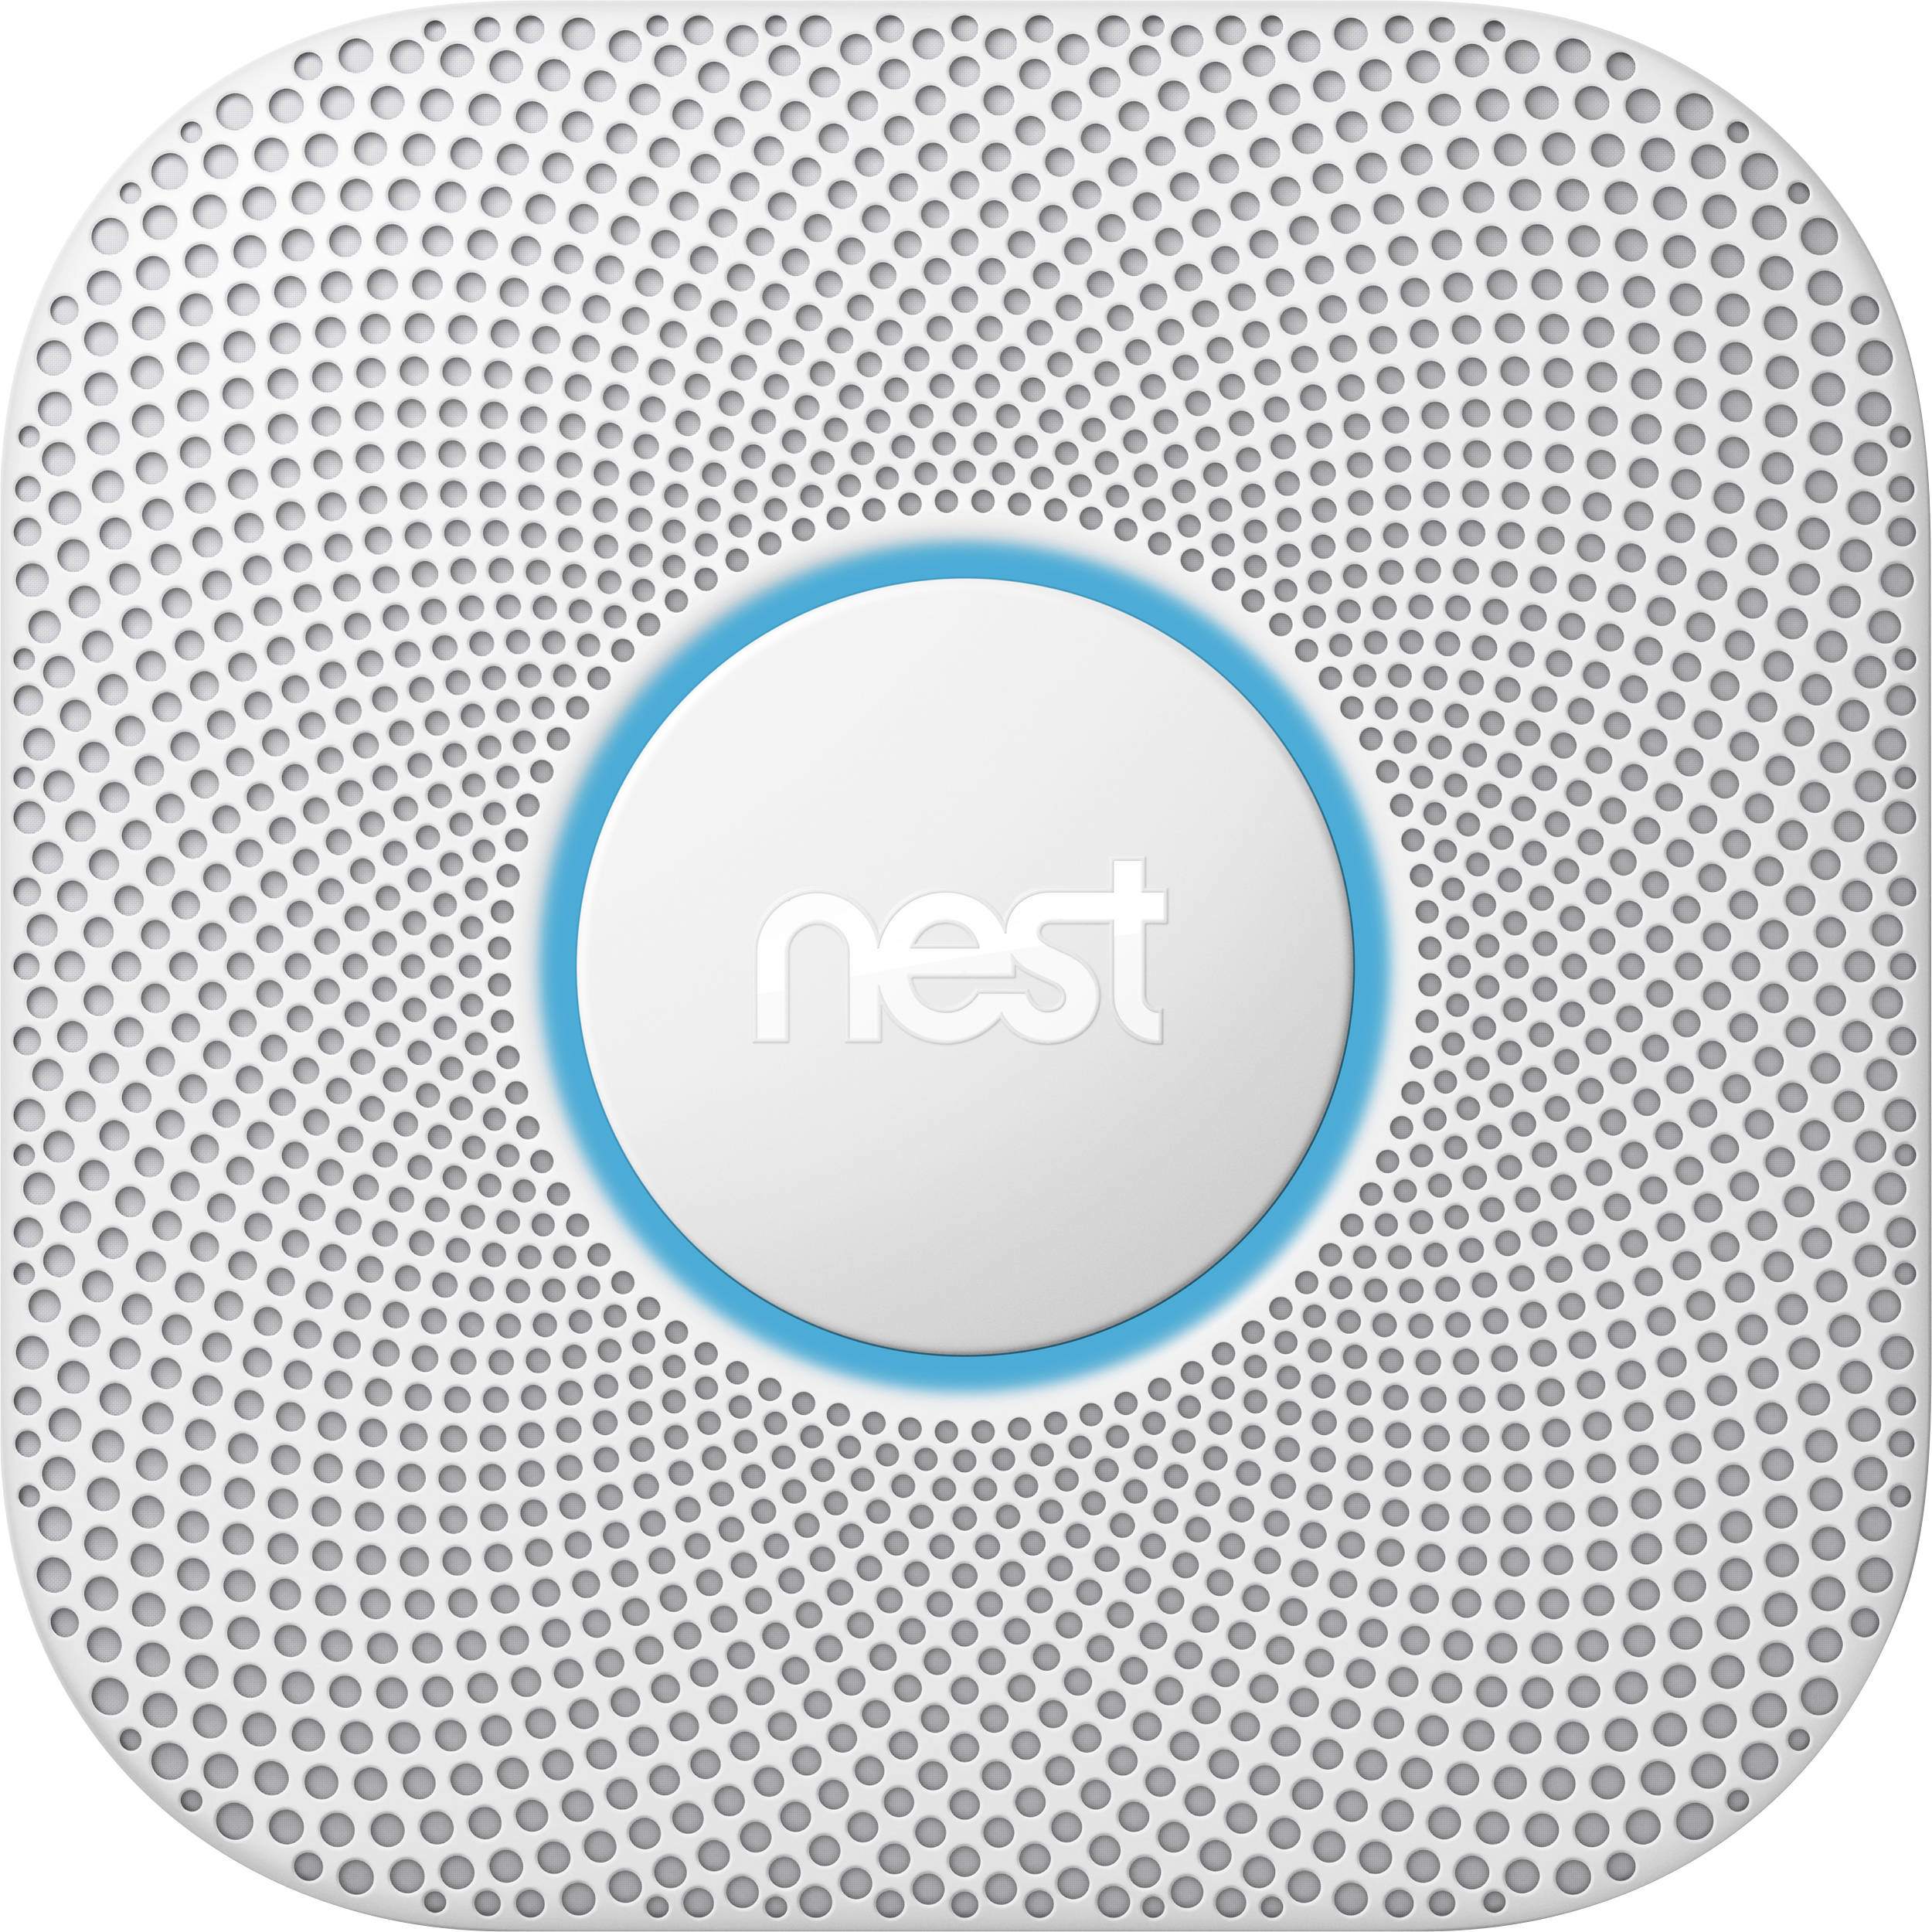 Nest Protect Smoke and Carbon Monoxide Alarm (2nd Generation) - Battery-Powered